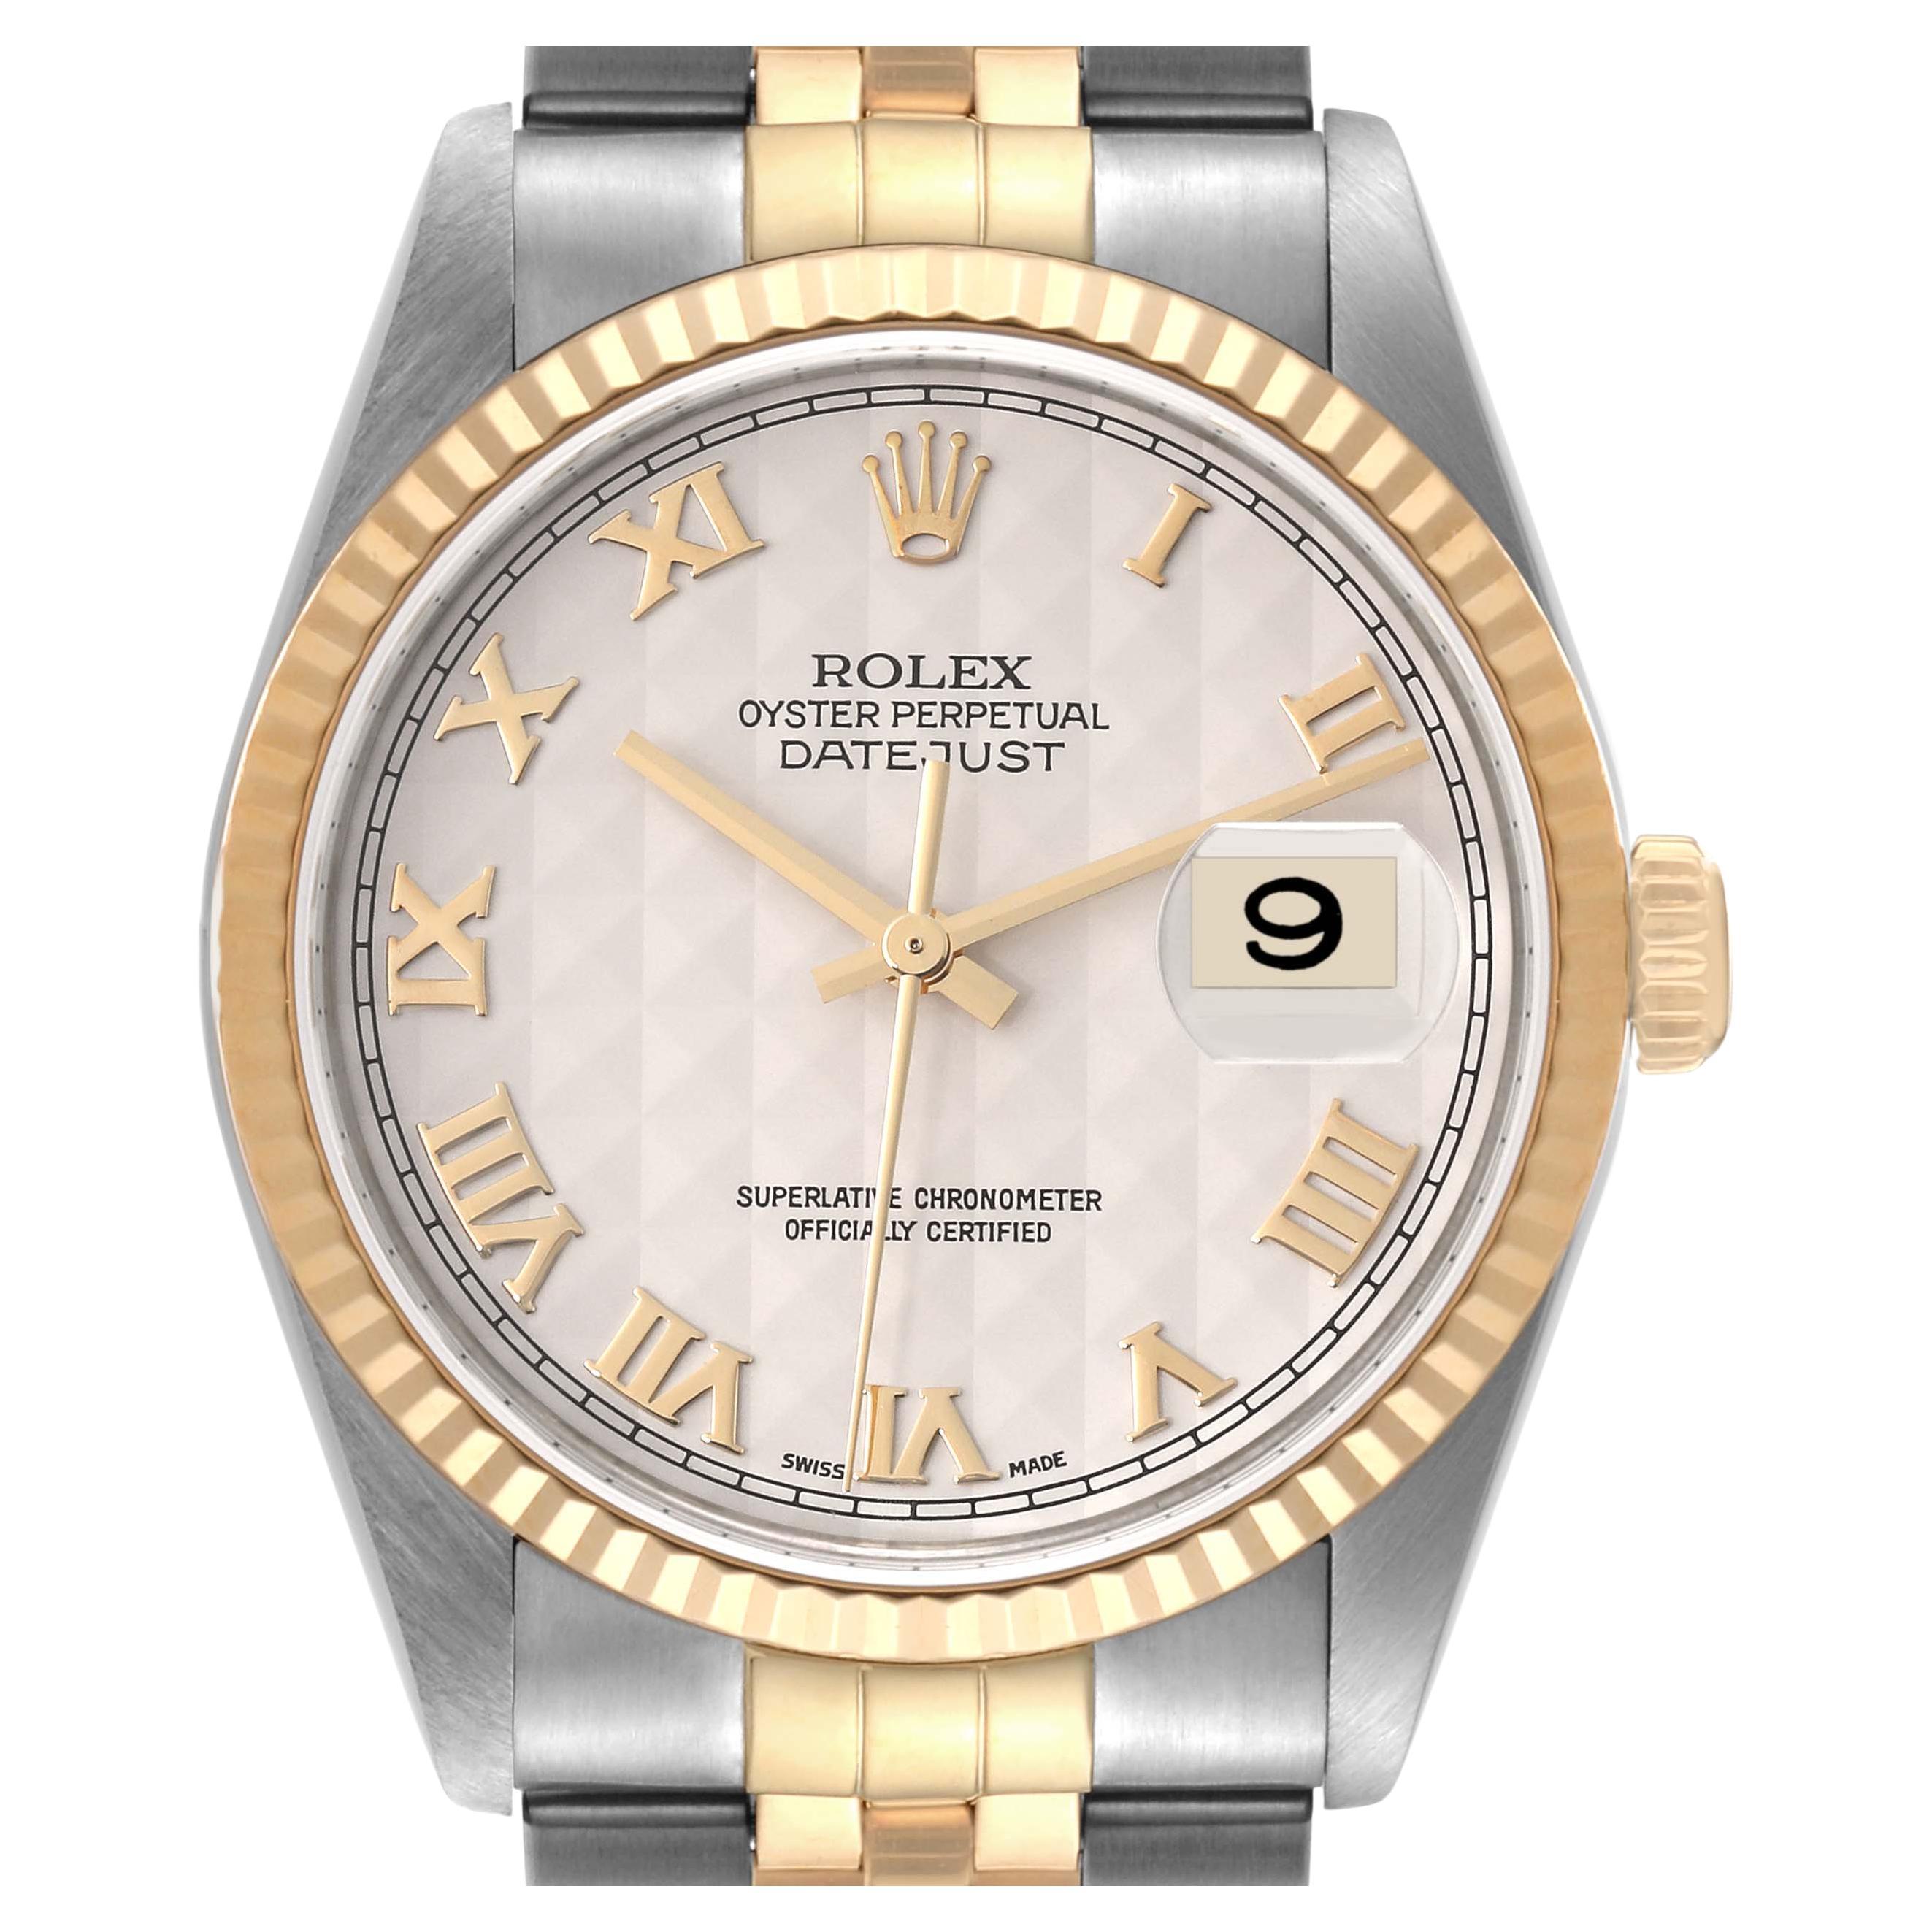 Rolex Datejust Steel Yellow Gold Pyramid Dial Mens Watch 16233 Box Papers